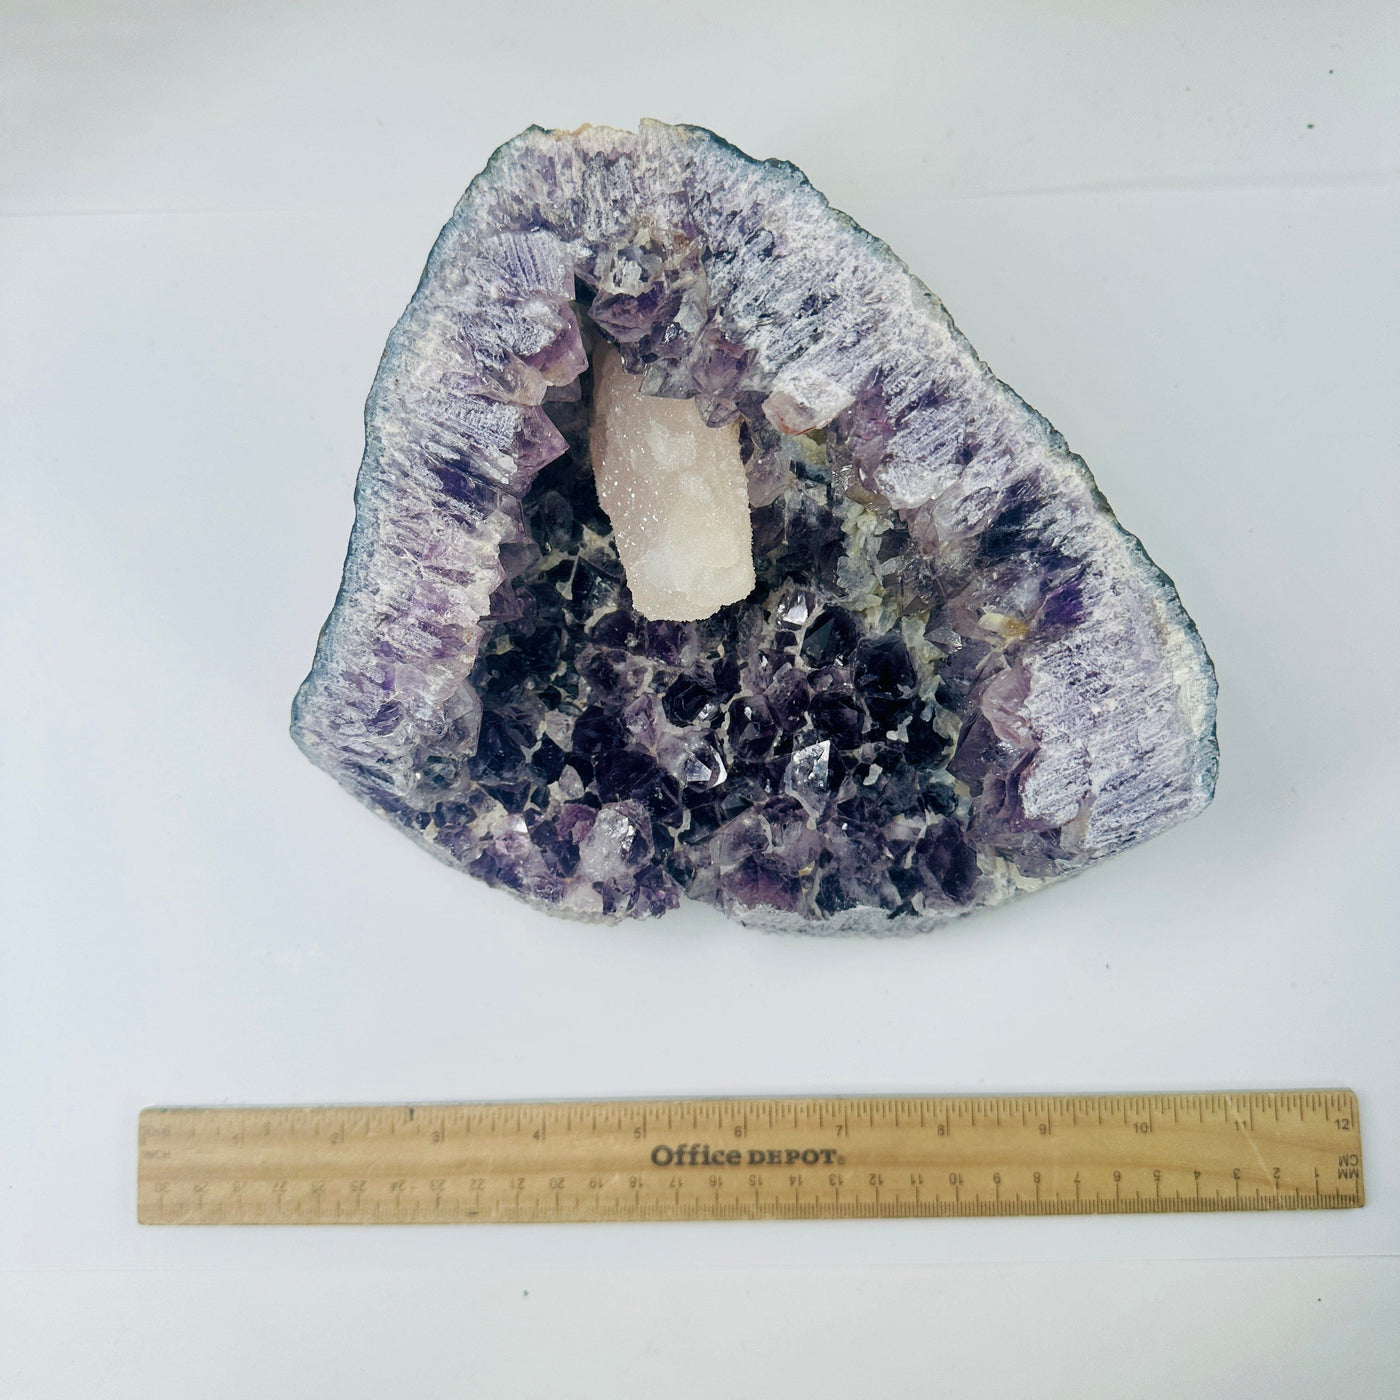 Amethyst Cluster with Crystal Quartz - Large High Quality Amethyst - You Choose variant B with ruler for size reference